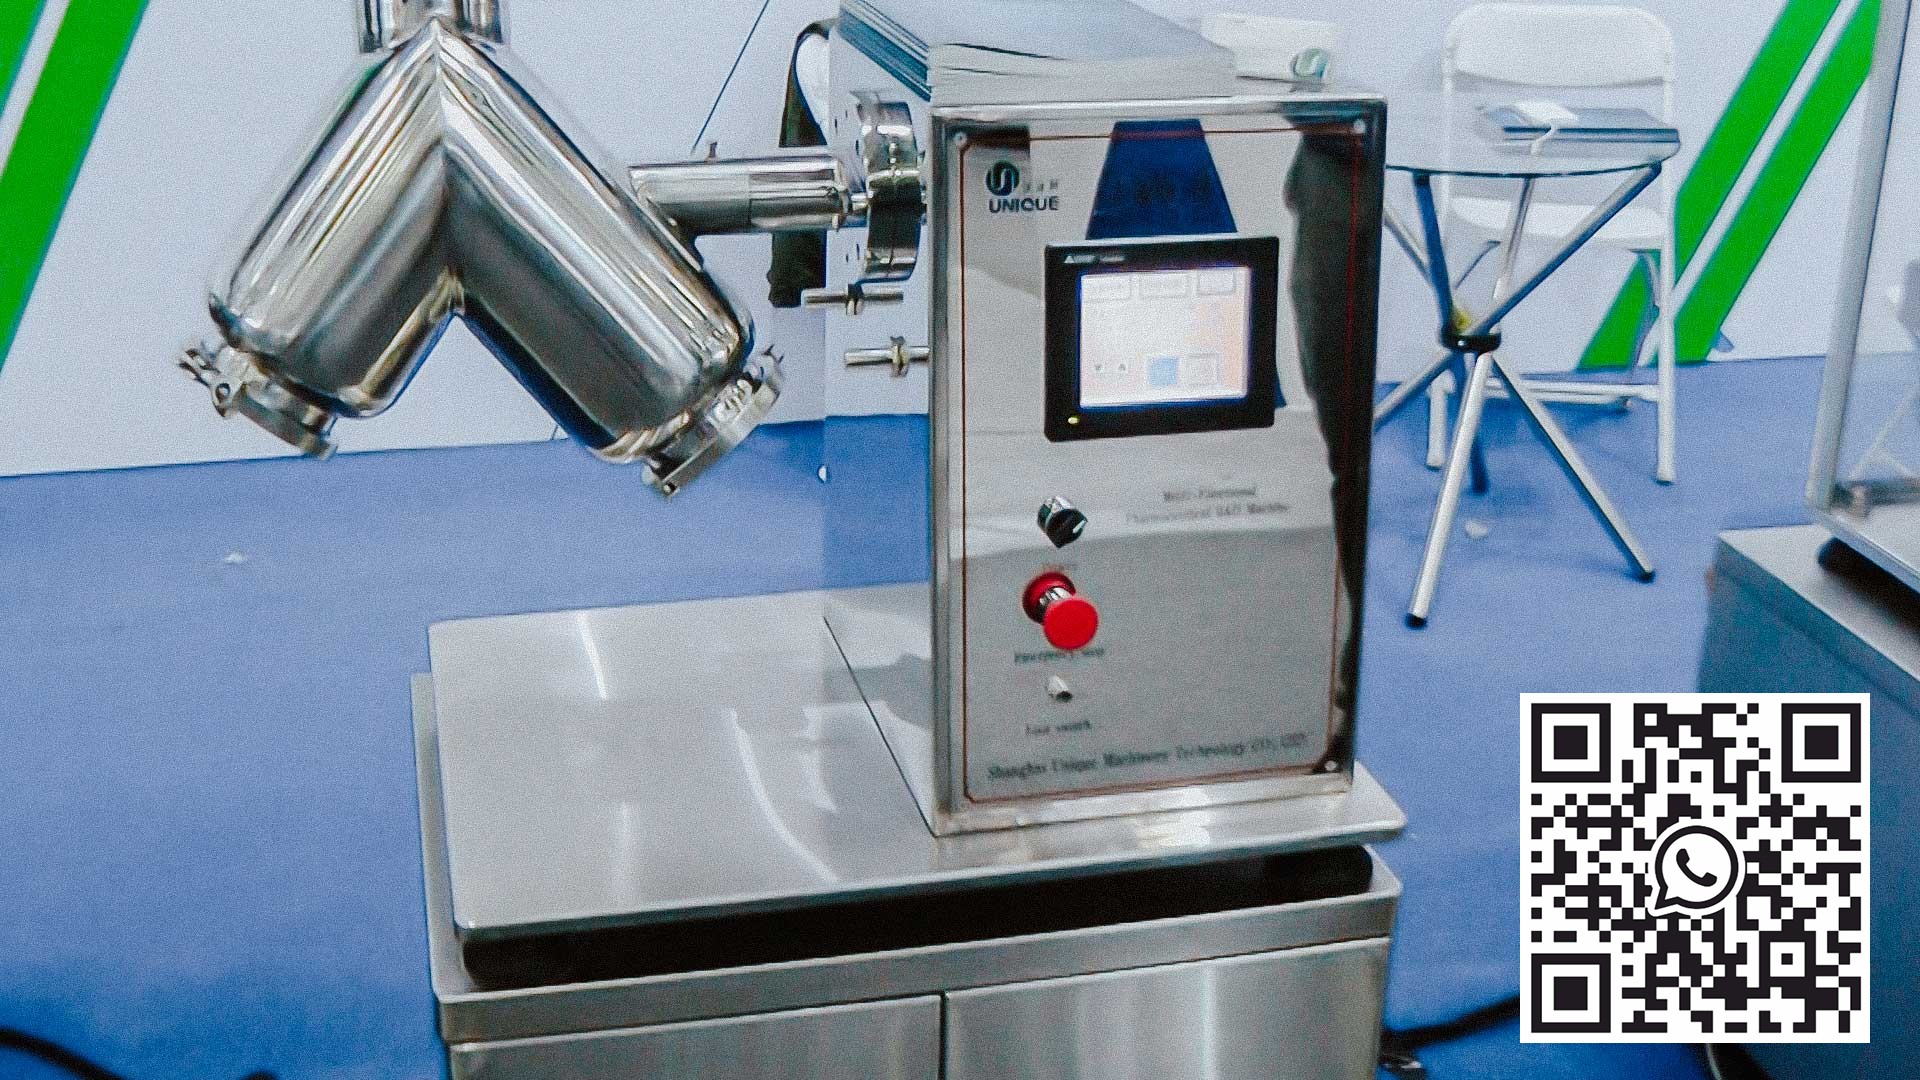 V-mixer to prepare a mixture of powders use for drug manufacture